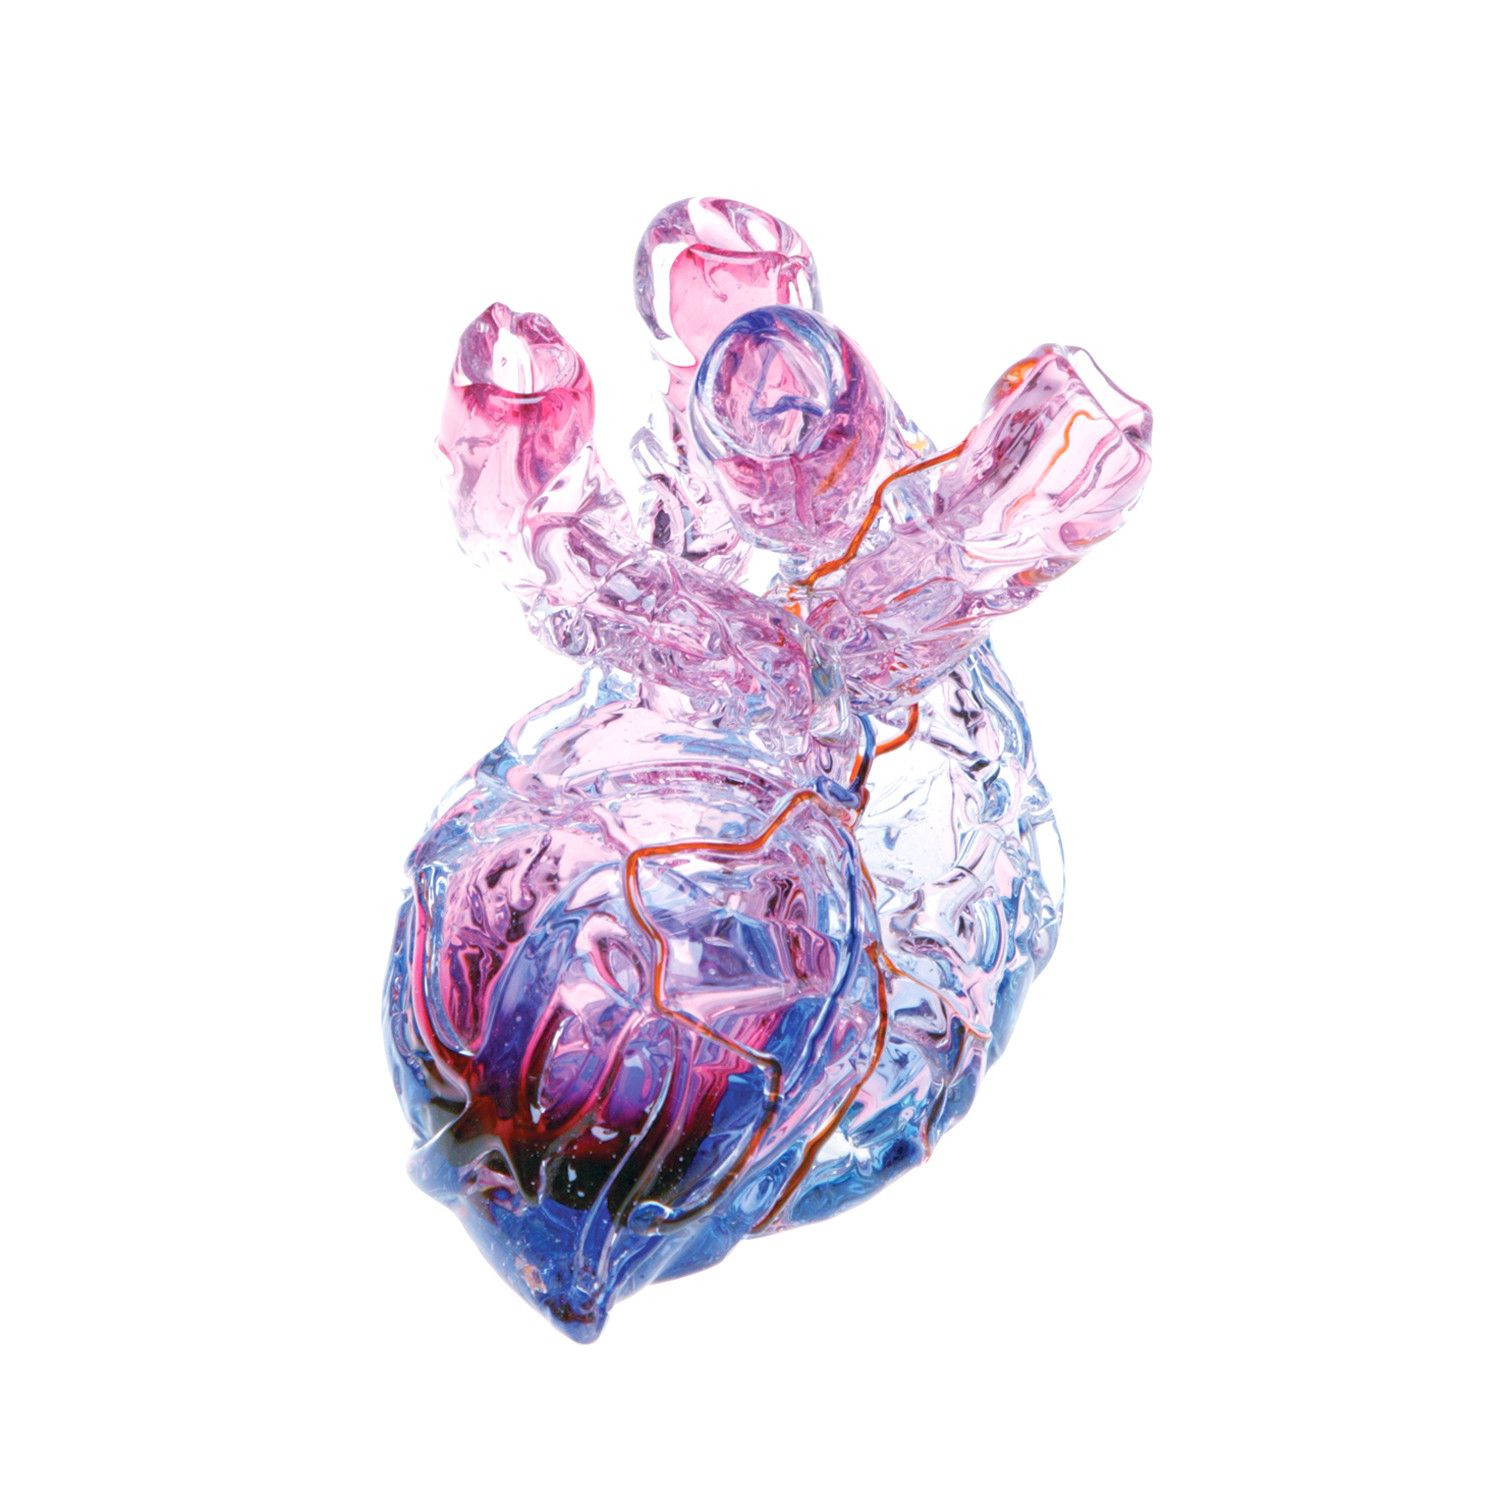 30 Stunning Anatomic Heart Vase 2024 free download anatomic heart vase of cardiac vase home decor pinterest throughout anatomical heart vase by esque studio the anatomy of the heart the hardest working muscle in the entirety of the human bod